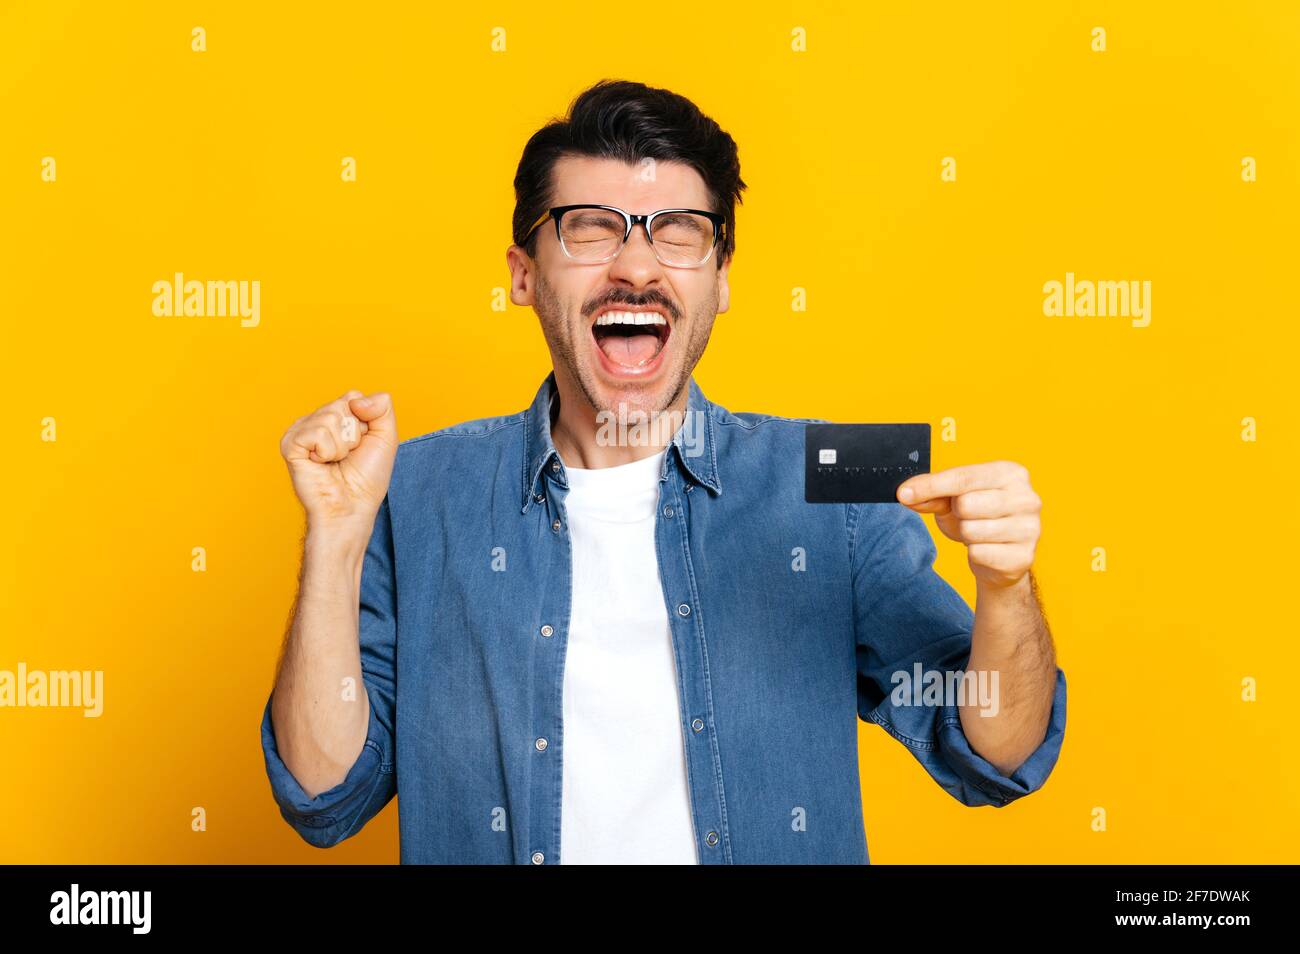 Happy cheerful caucasian unshaven stylish guy holding credit card in hand, shouting joyfully, standing on isolated orange background, finance and banking concept Stock Photo